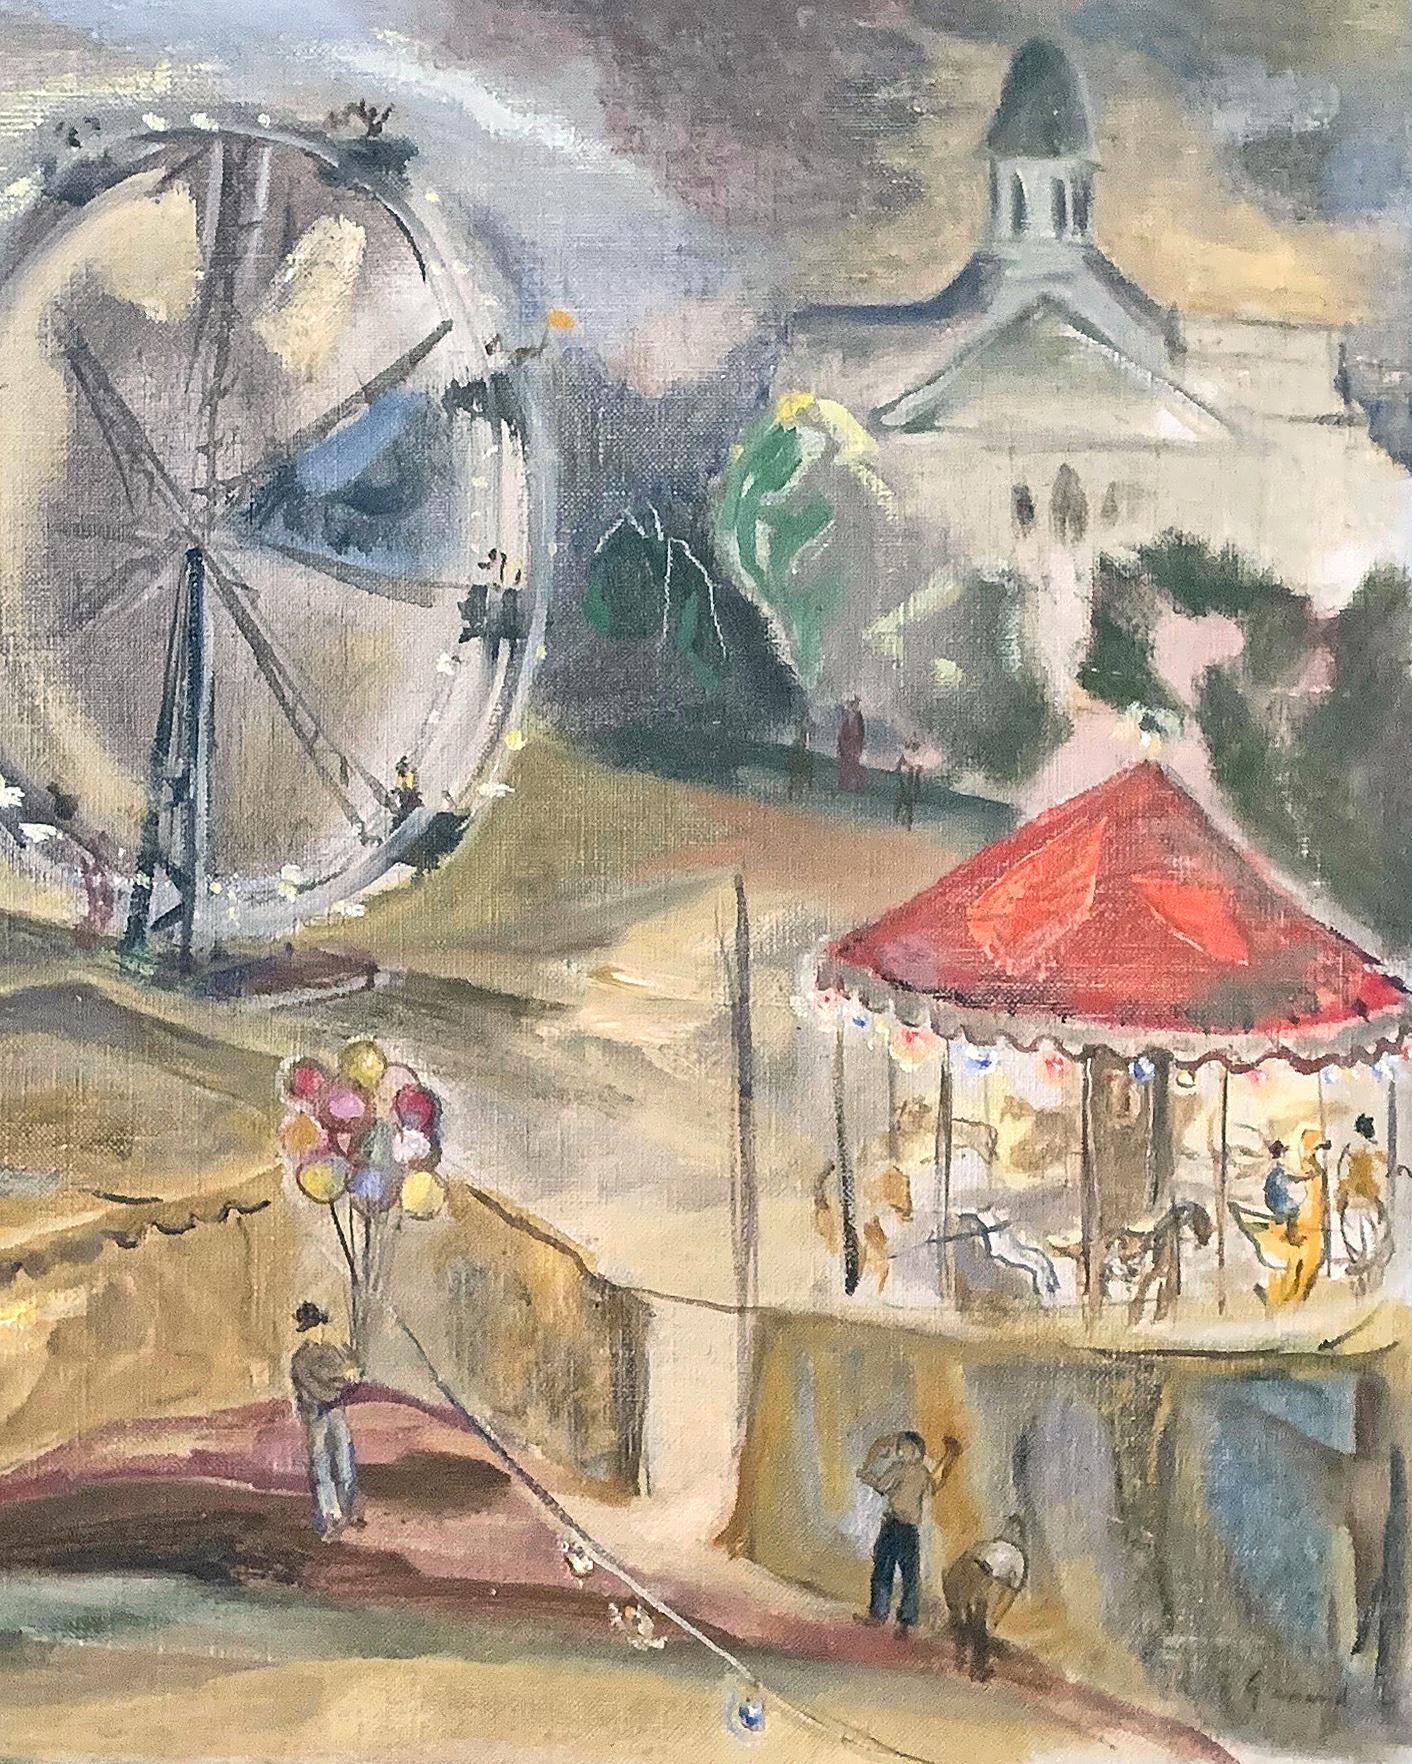 A celebration of 1930s America, full of atmosphere and color, this painting by John Gernand depicts a carnival in Manchester, New Hampshire, including a carousel, Ferris wheel, tents, and colorful posters beckoning to passers-by. Gernand was one of